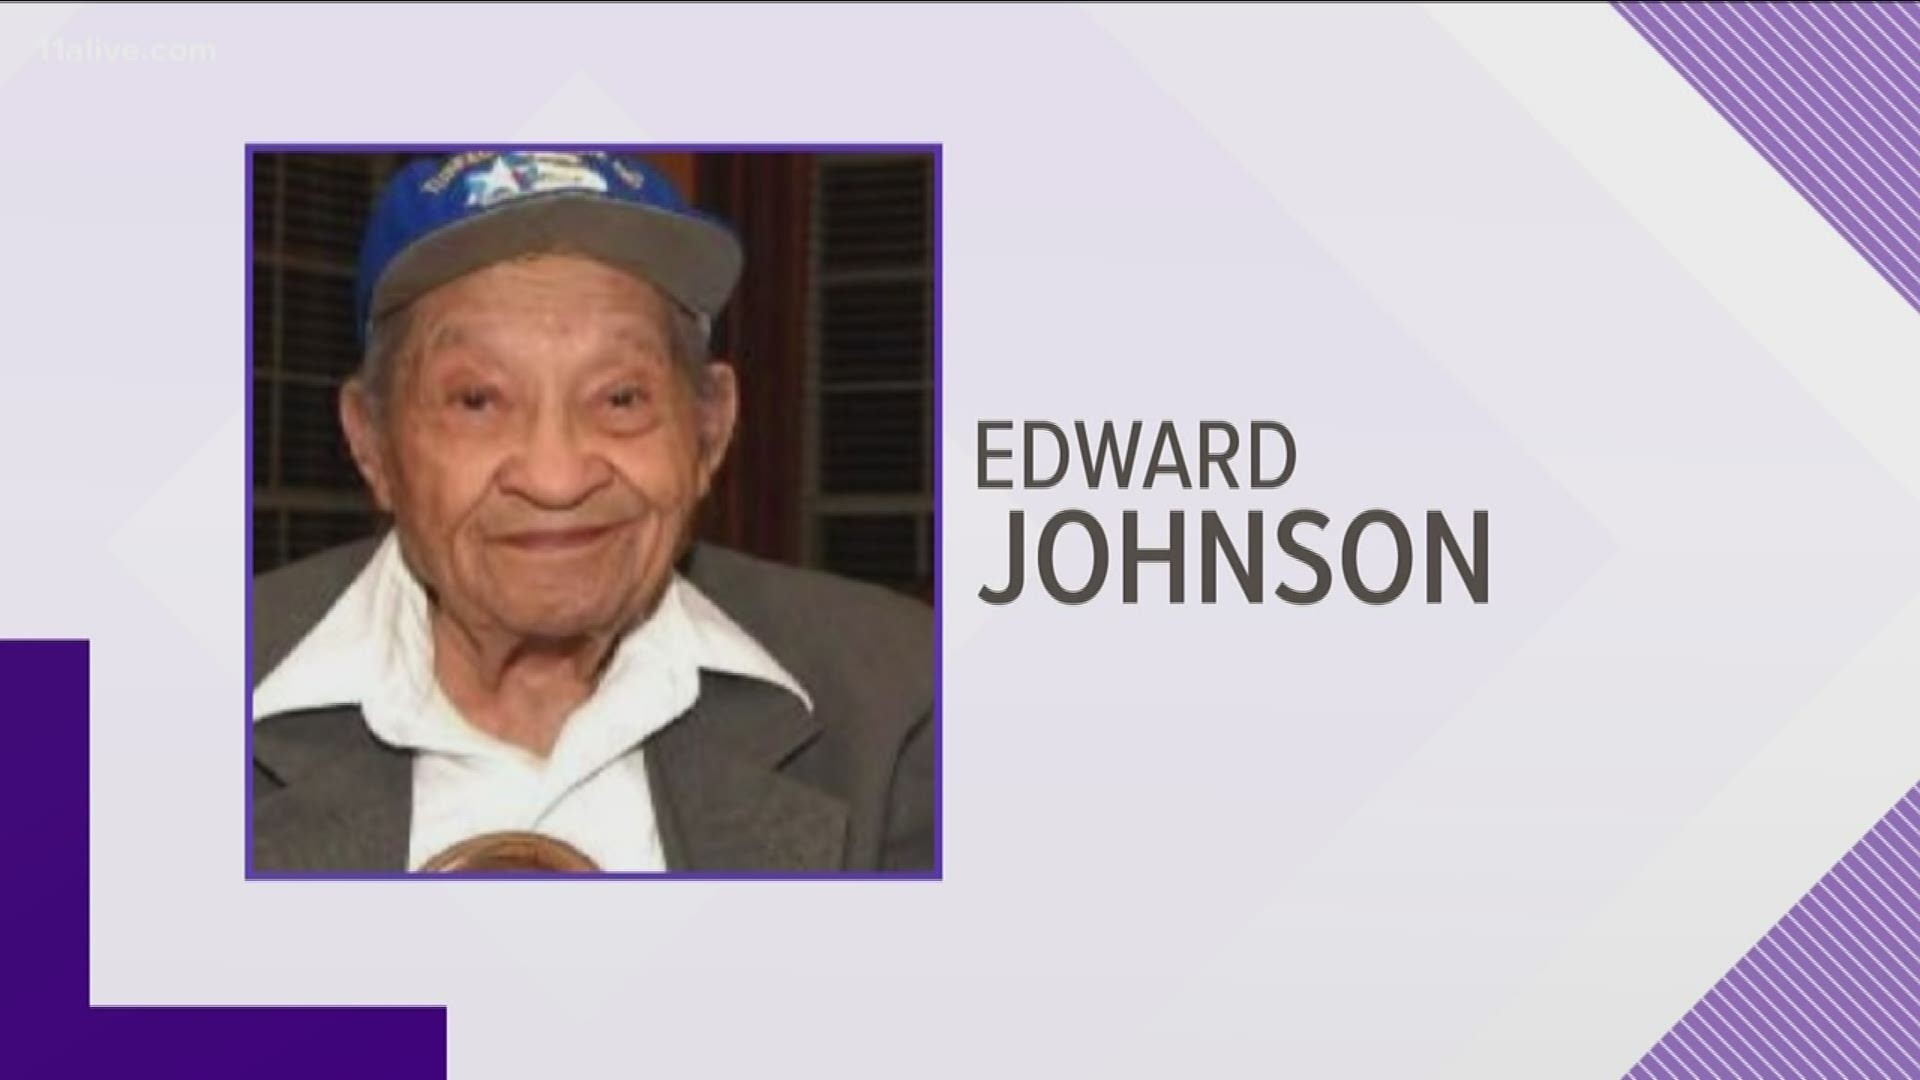 103-year-old Edward Johnson, a veteran Tuskegee Airman, served as a ground school instructor during WWII.